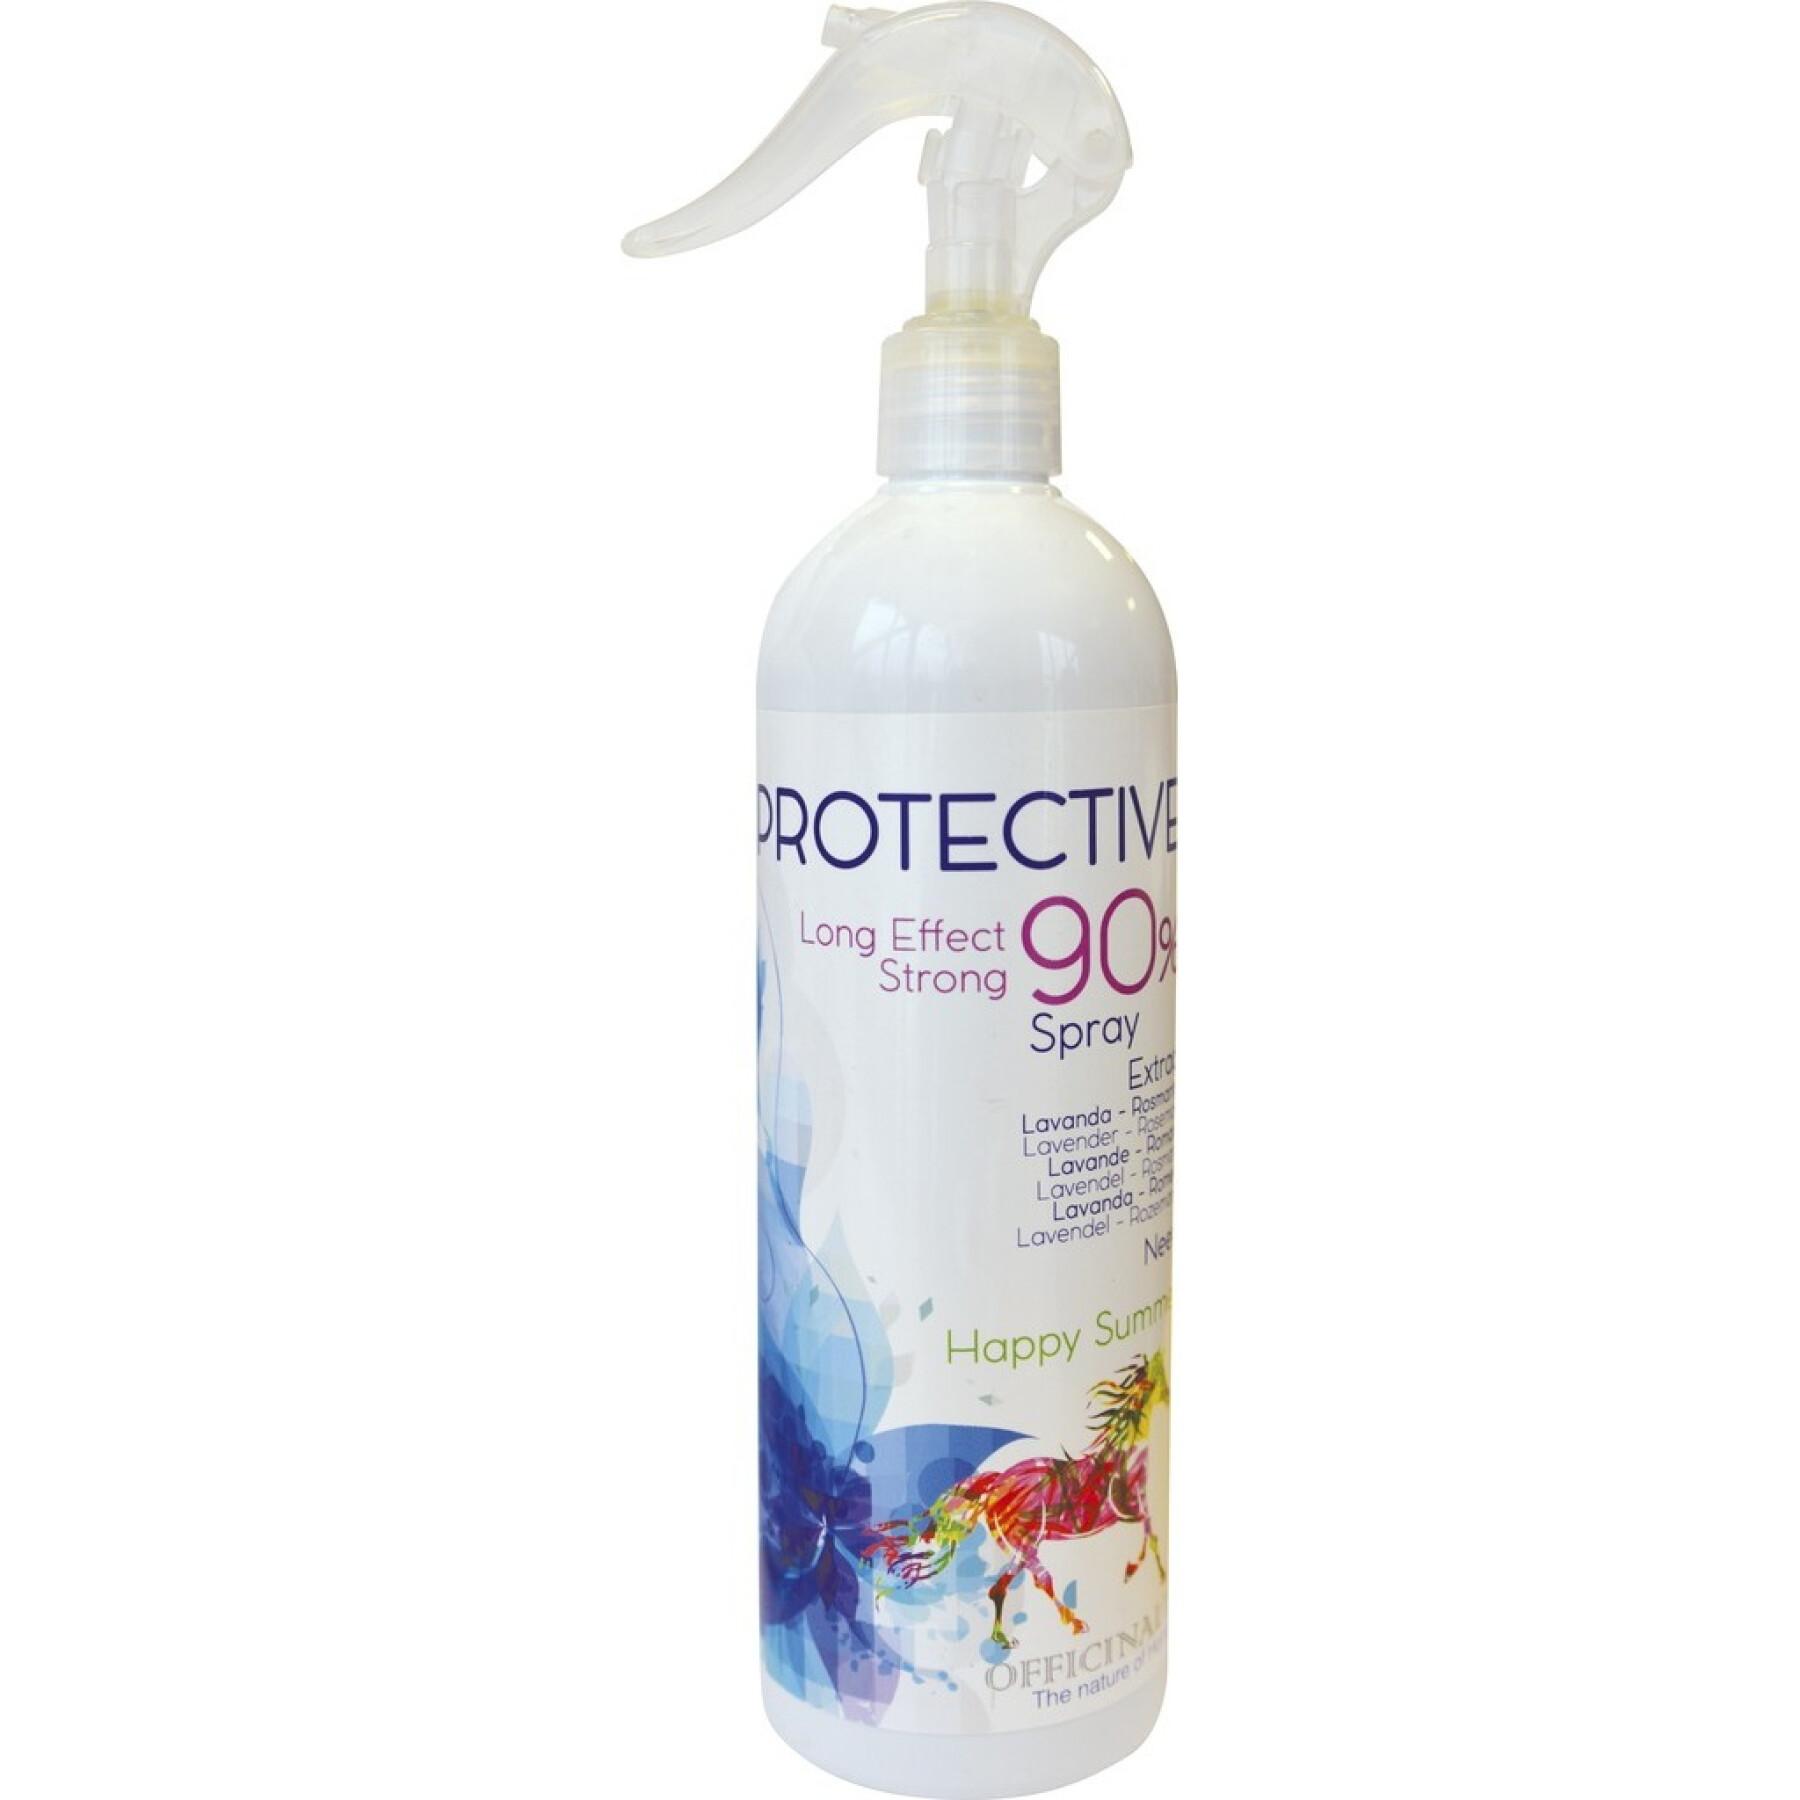 Anti-insect spray for horses protective 90 Officinalis